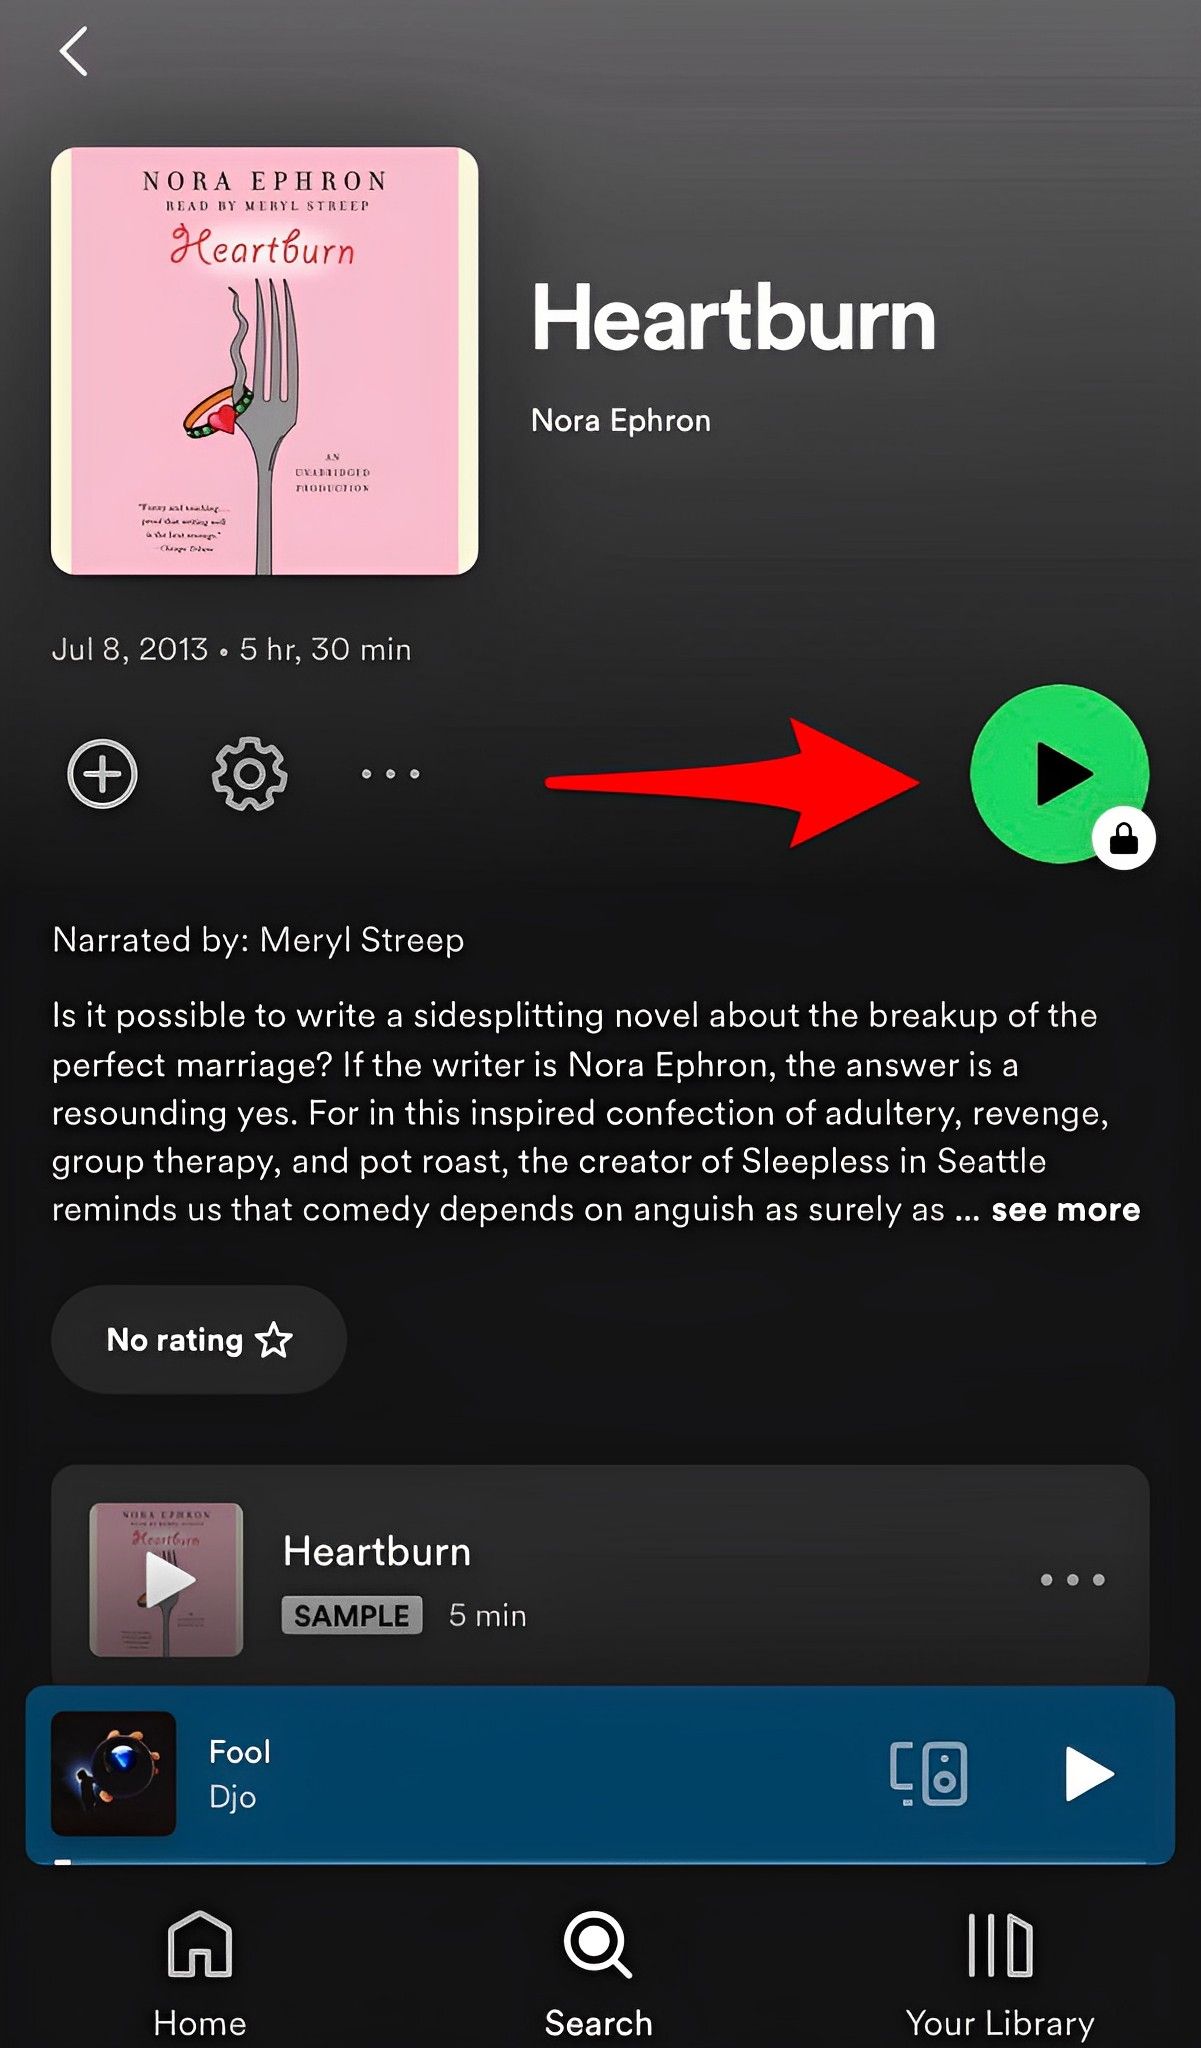 how to use Spotify Audiobooks